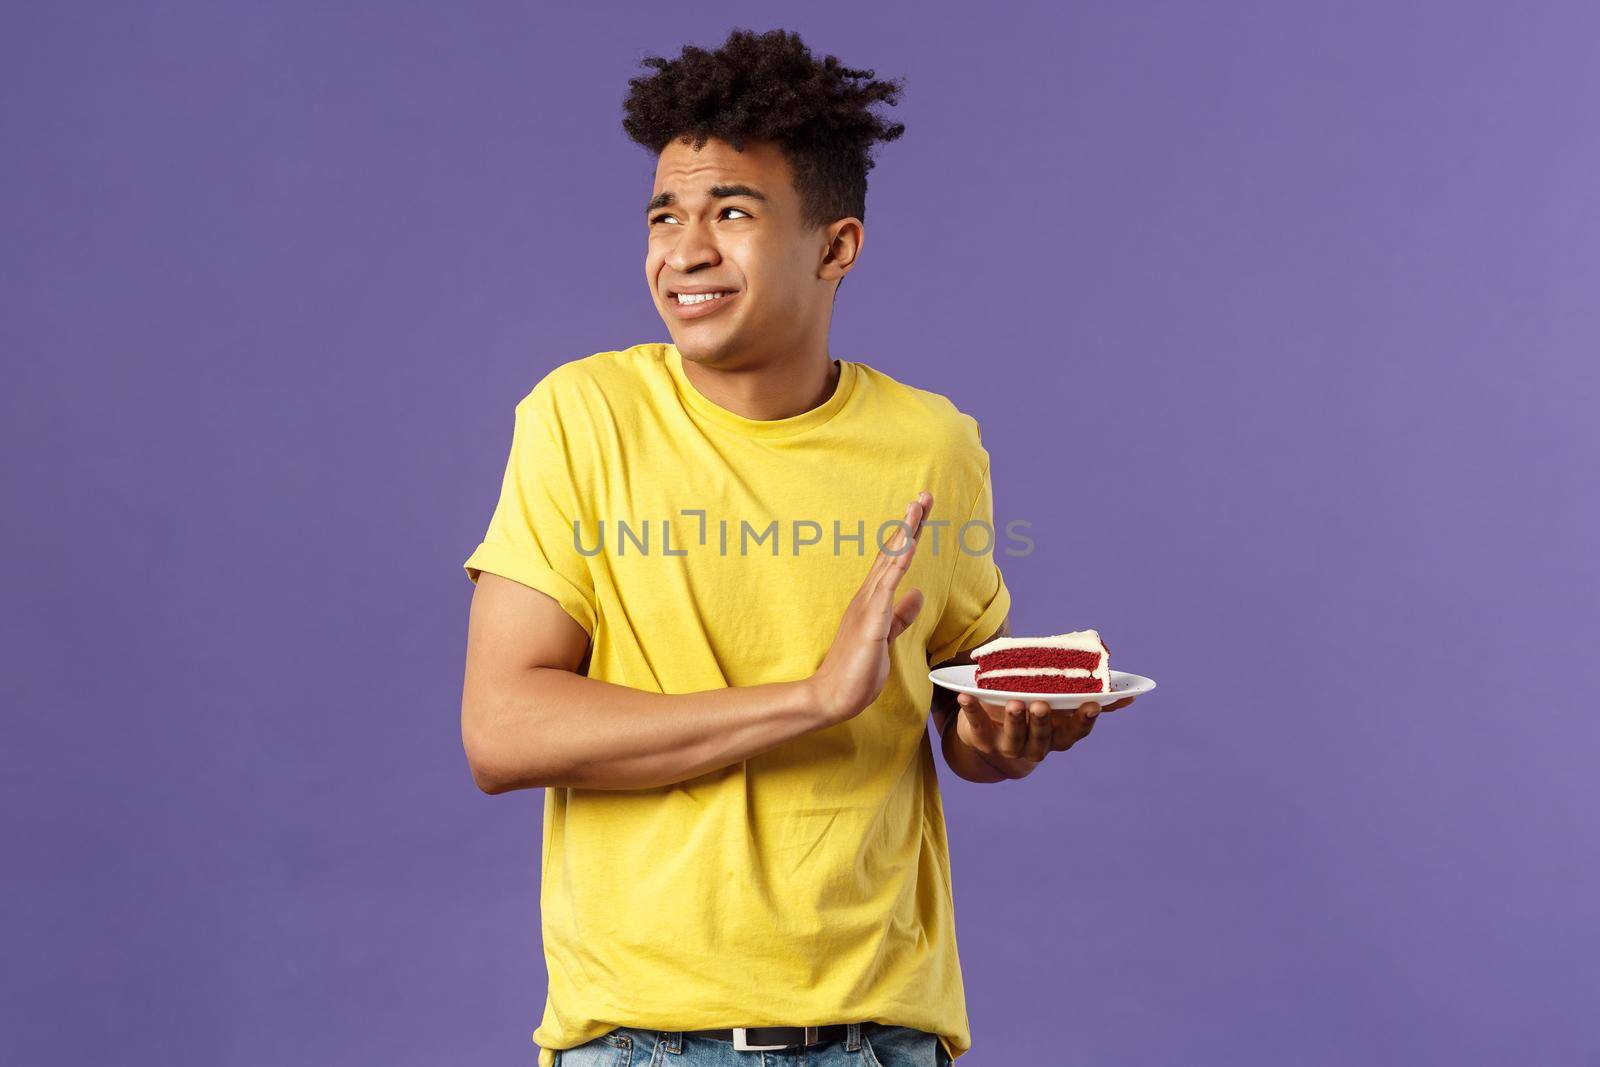 Celebration, party and holidays concept. Oh gosh its disgusting. Portrait of reluctant and displeased young man turn away from awful bad taste cake, show refusal, rejection or stop sign by Benzoix